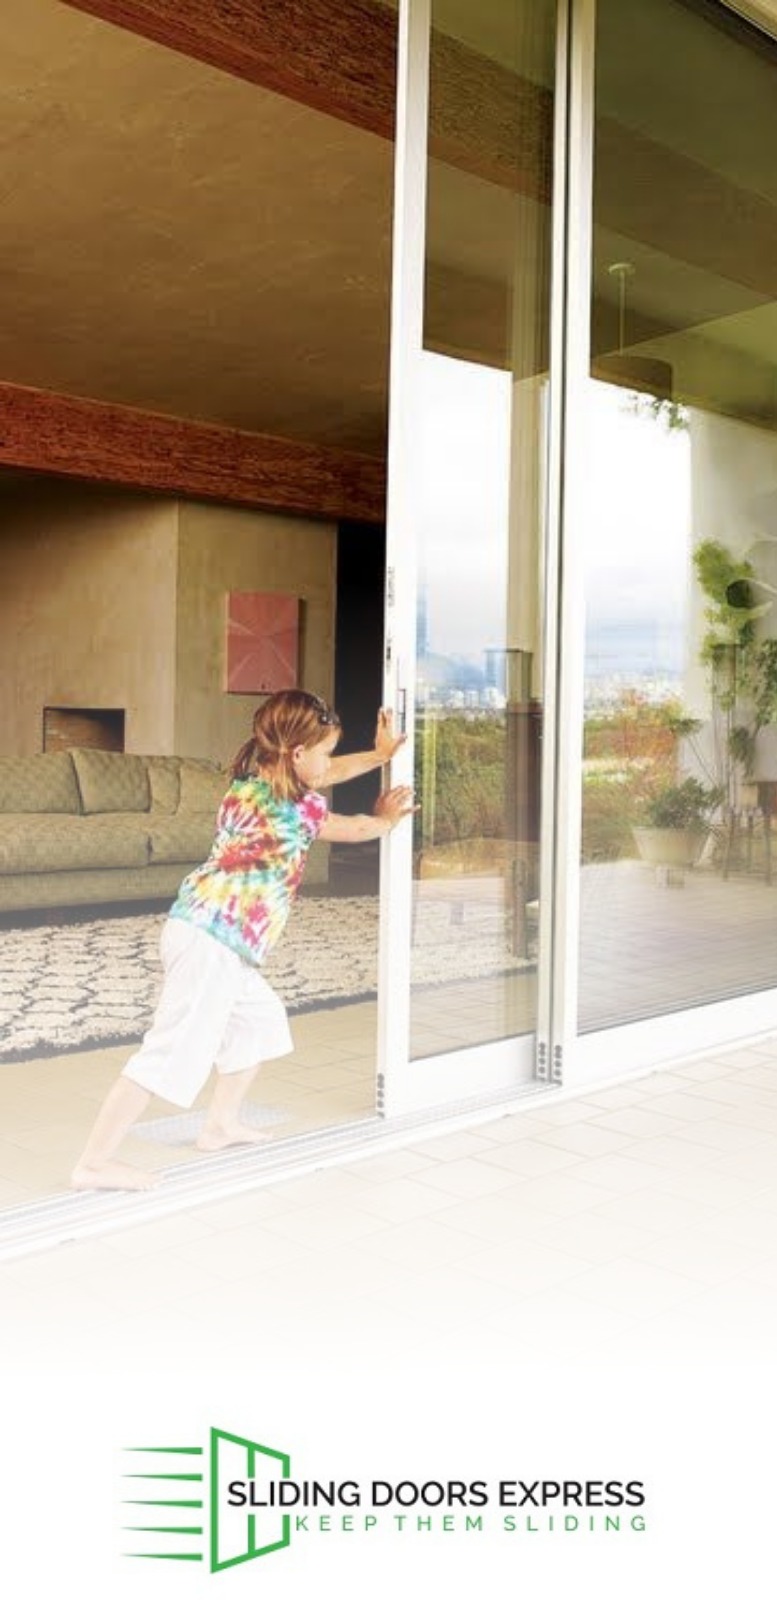 Sliding door repairs are one of the most demanded services since sliding doors are daily used inside families' homes. Sliding Door Express offers a variety of sliding door service.